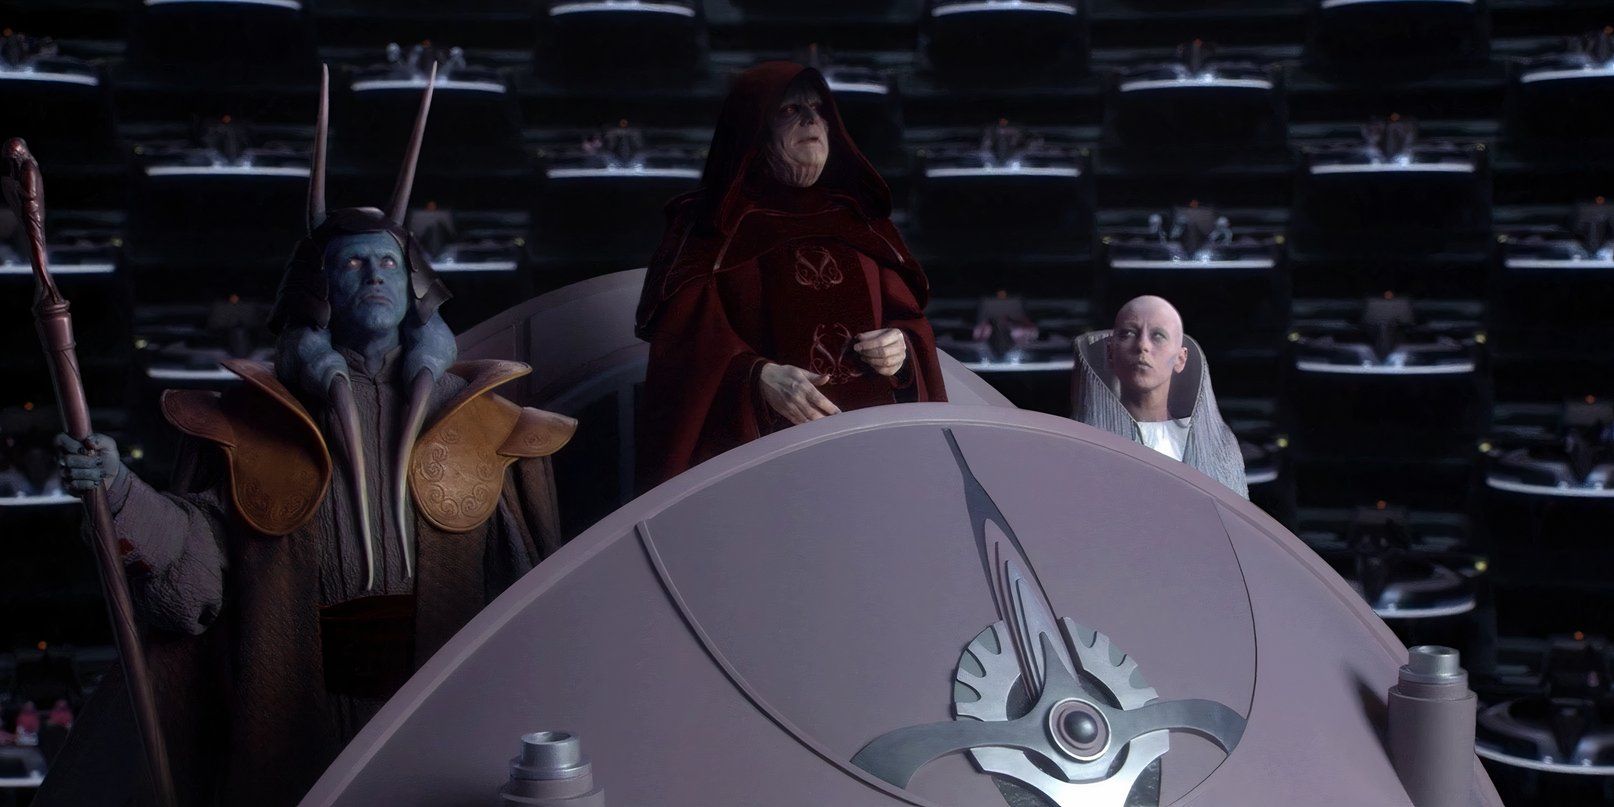 Palpatine adresses the senate in a red robe, surronded by his advisers 